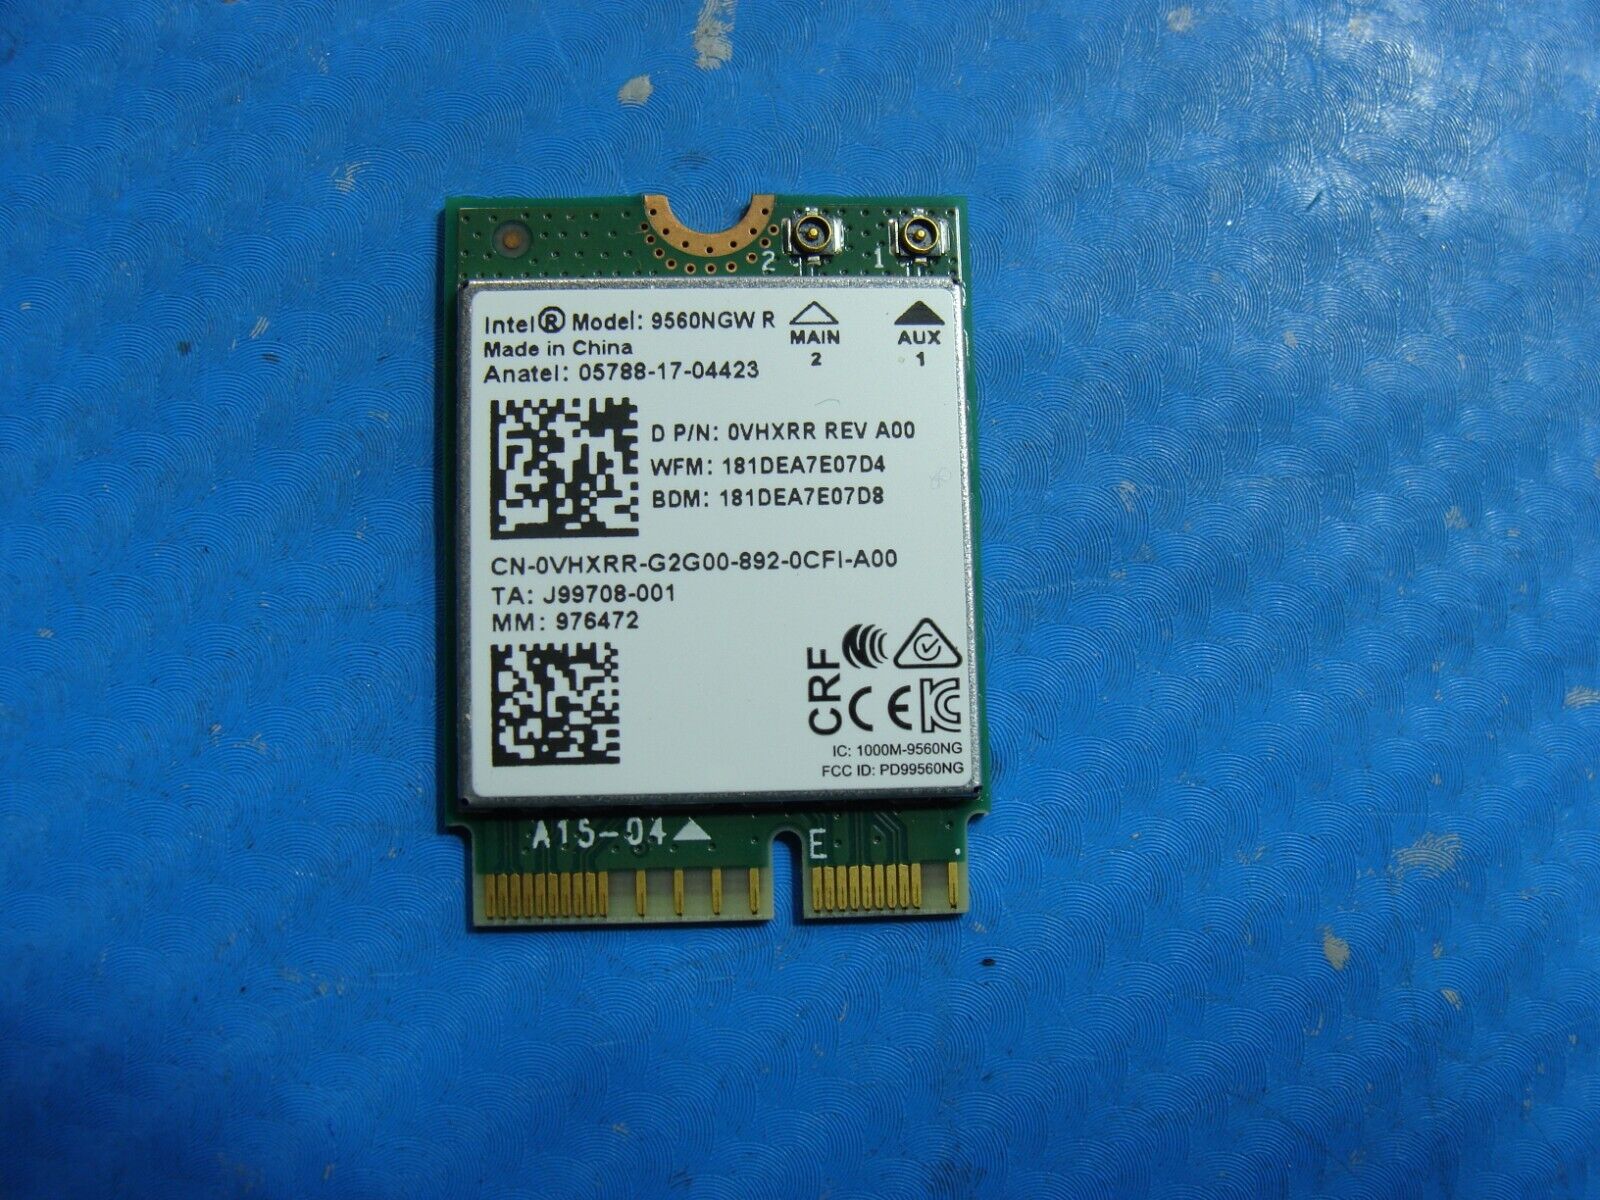 Dell Inspiron 15.6” 7586 Genuine Laptop Wireless WiFi Card 9560NGW VHXRR